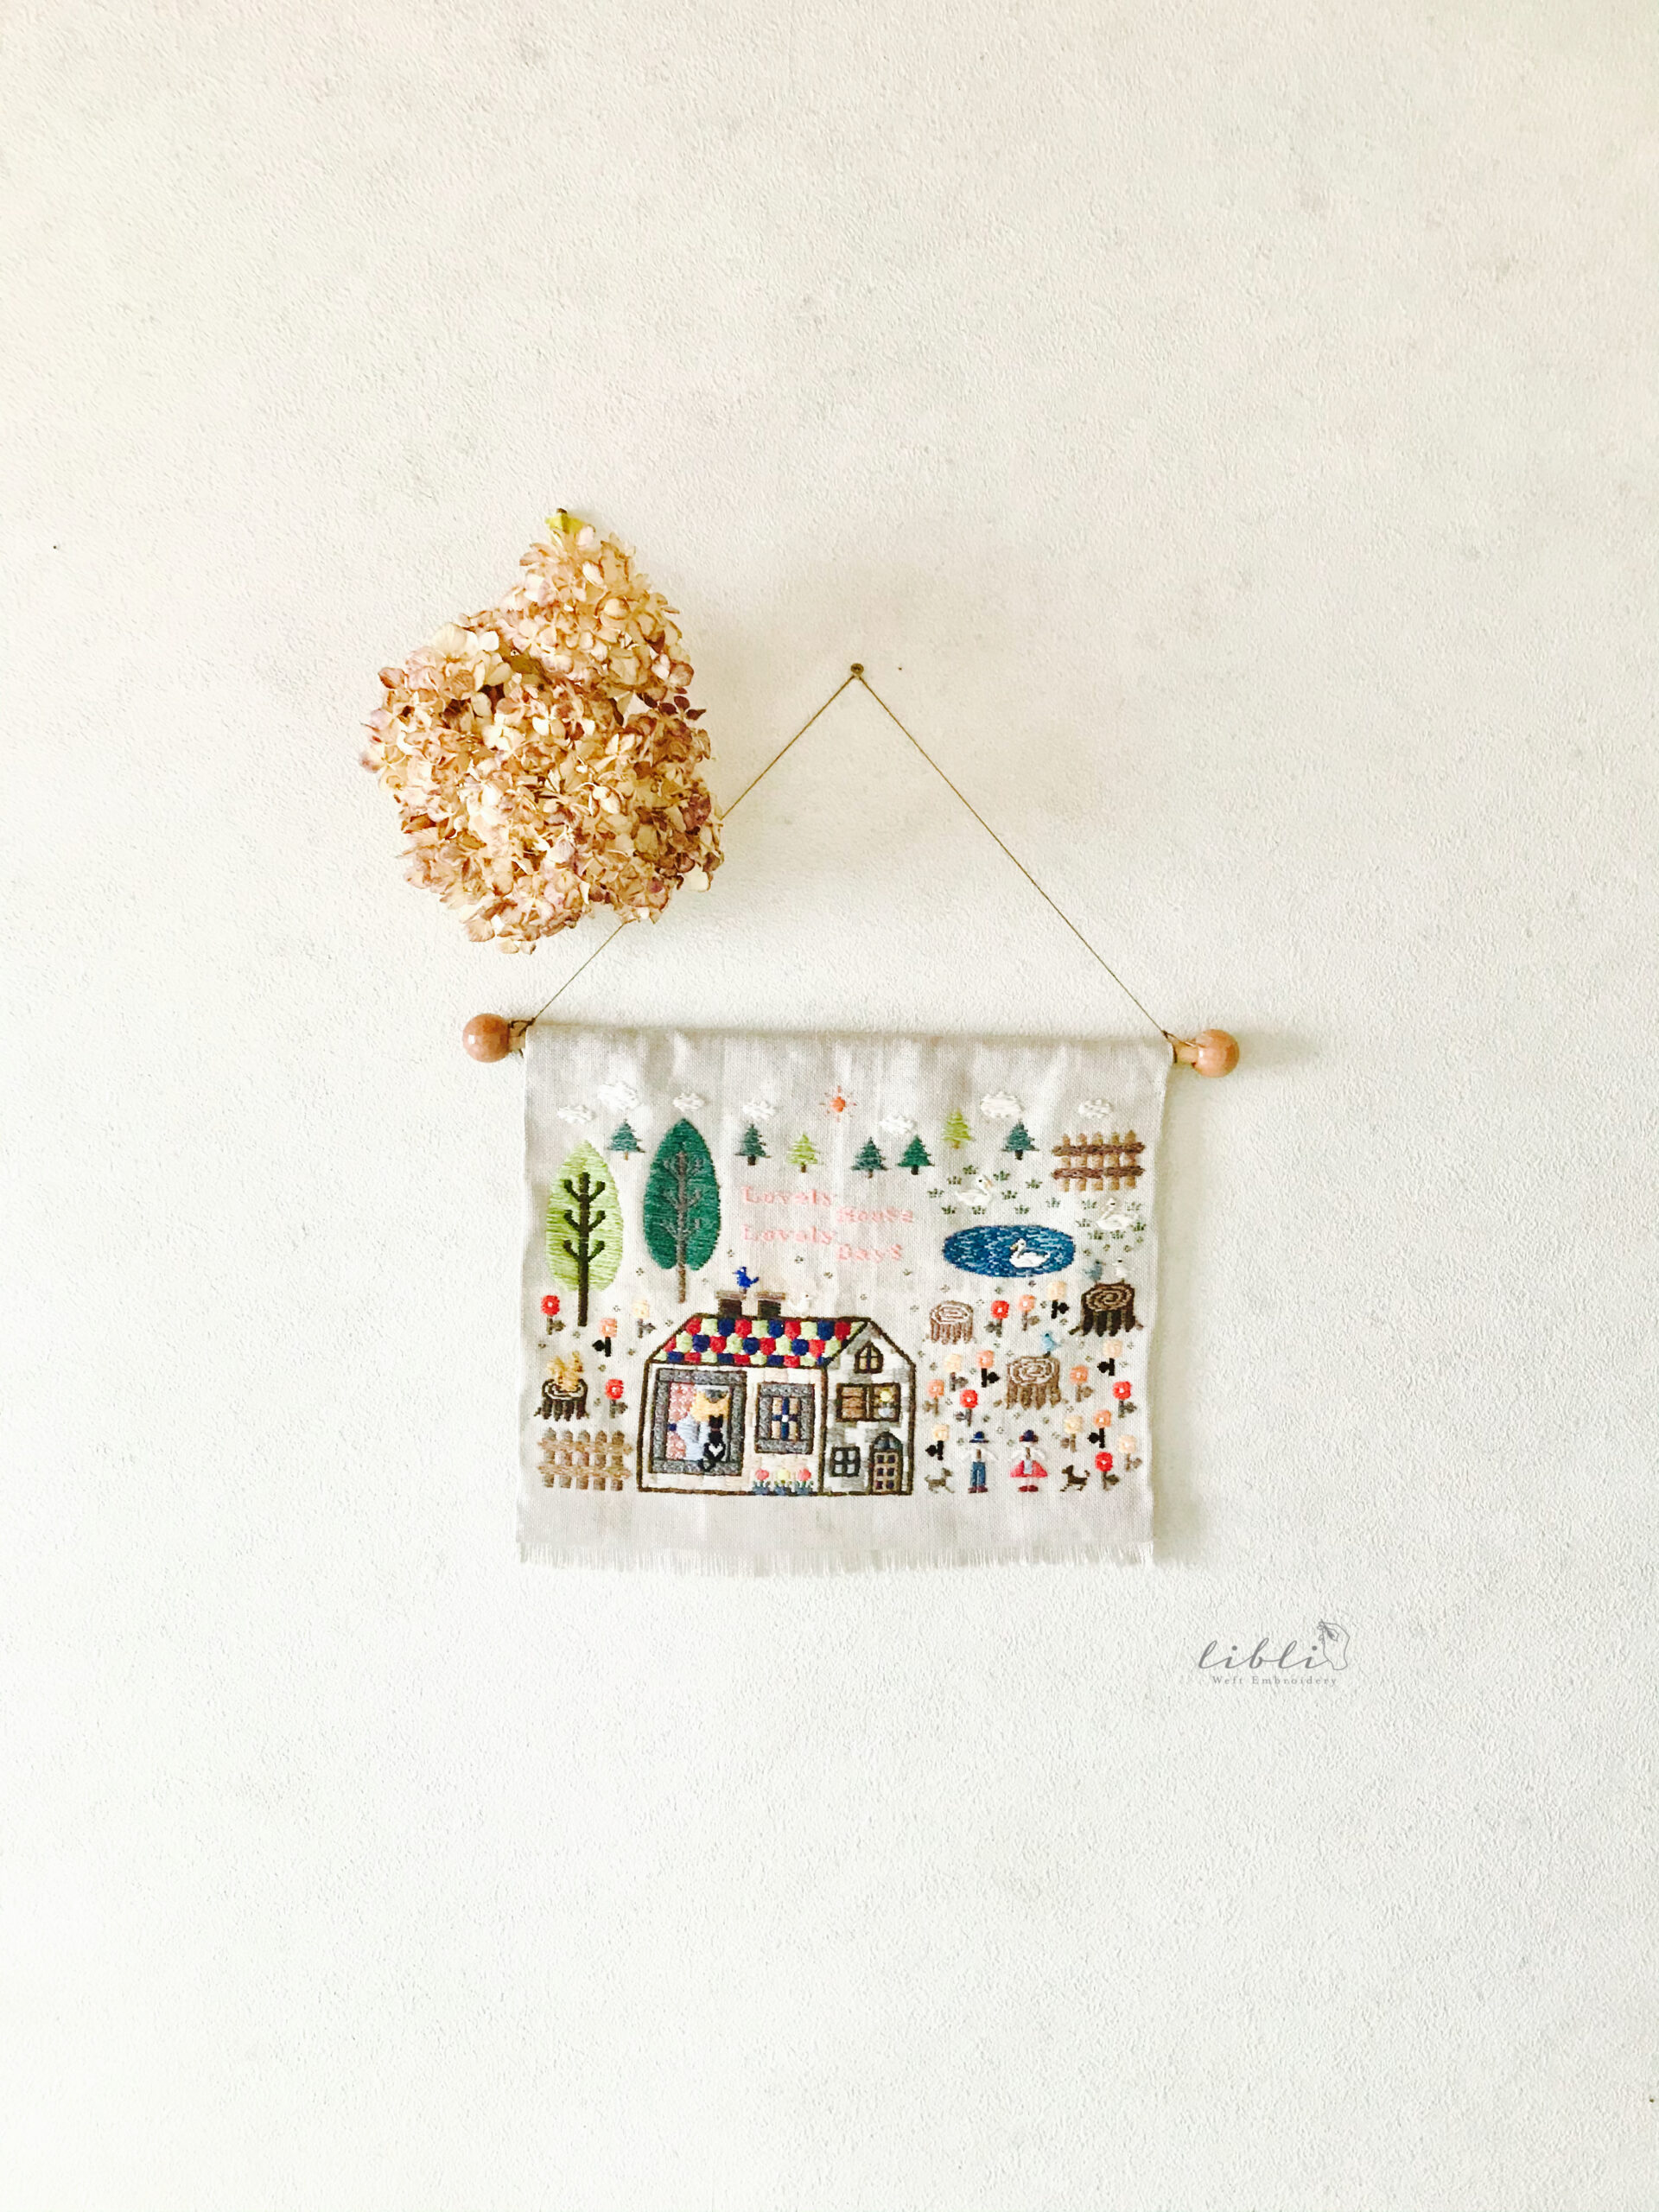 『Lovely House Lovely Days』お仕立て完成と、リブリの横糸刺繍・第一章の完了*｡ﾟ